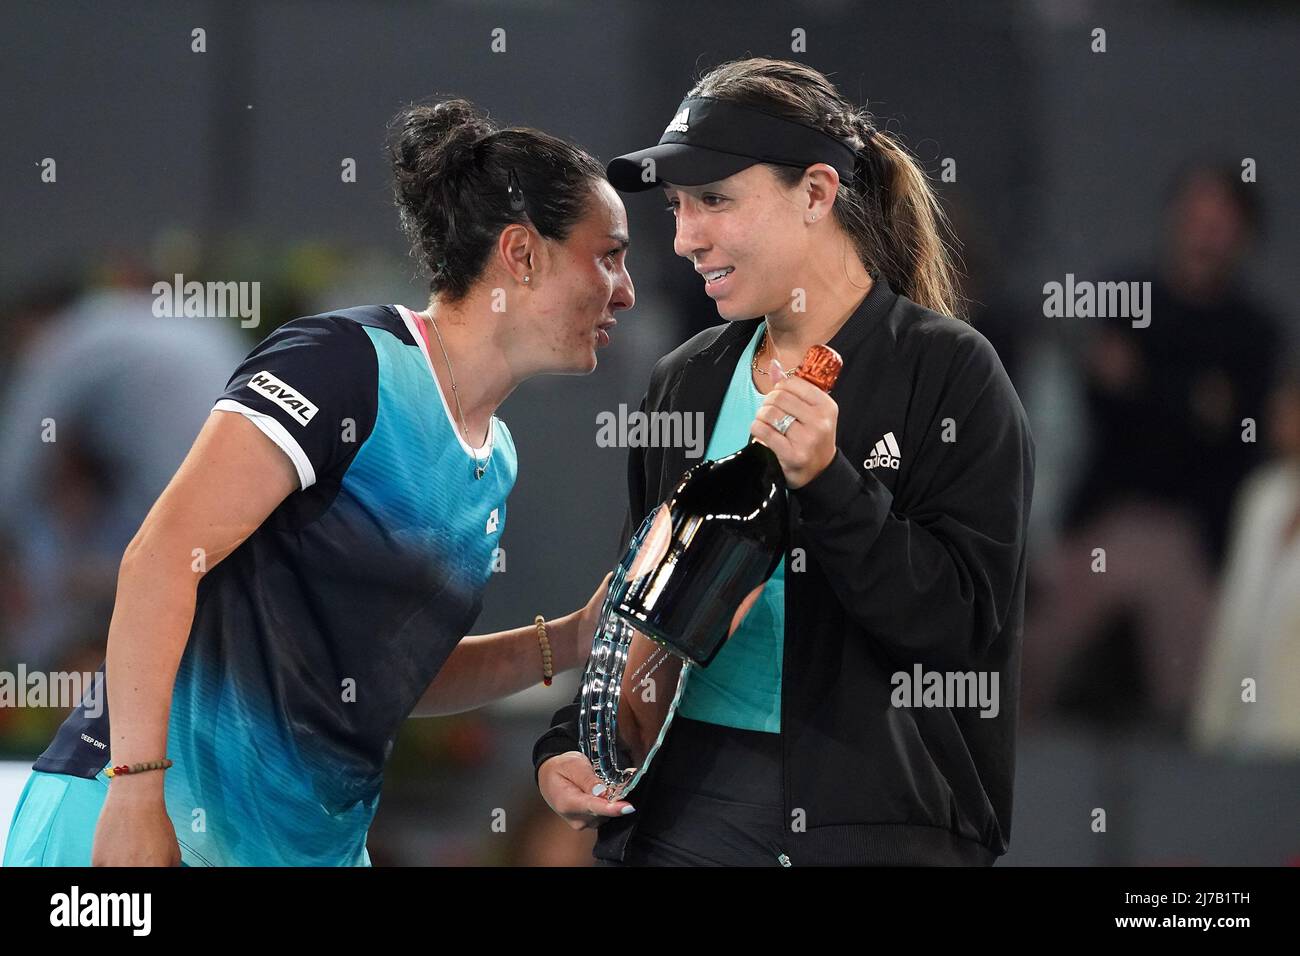 Ons Jabeur, Tunisia, Winner of the WTA Final Madrid Open Tennis 2022 (l) and Jessica Pegula, USA, finalist on May 7, 2022 in Madrid, Spain